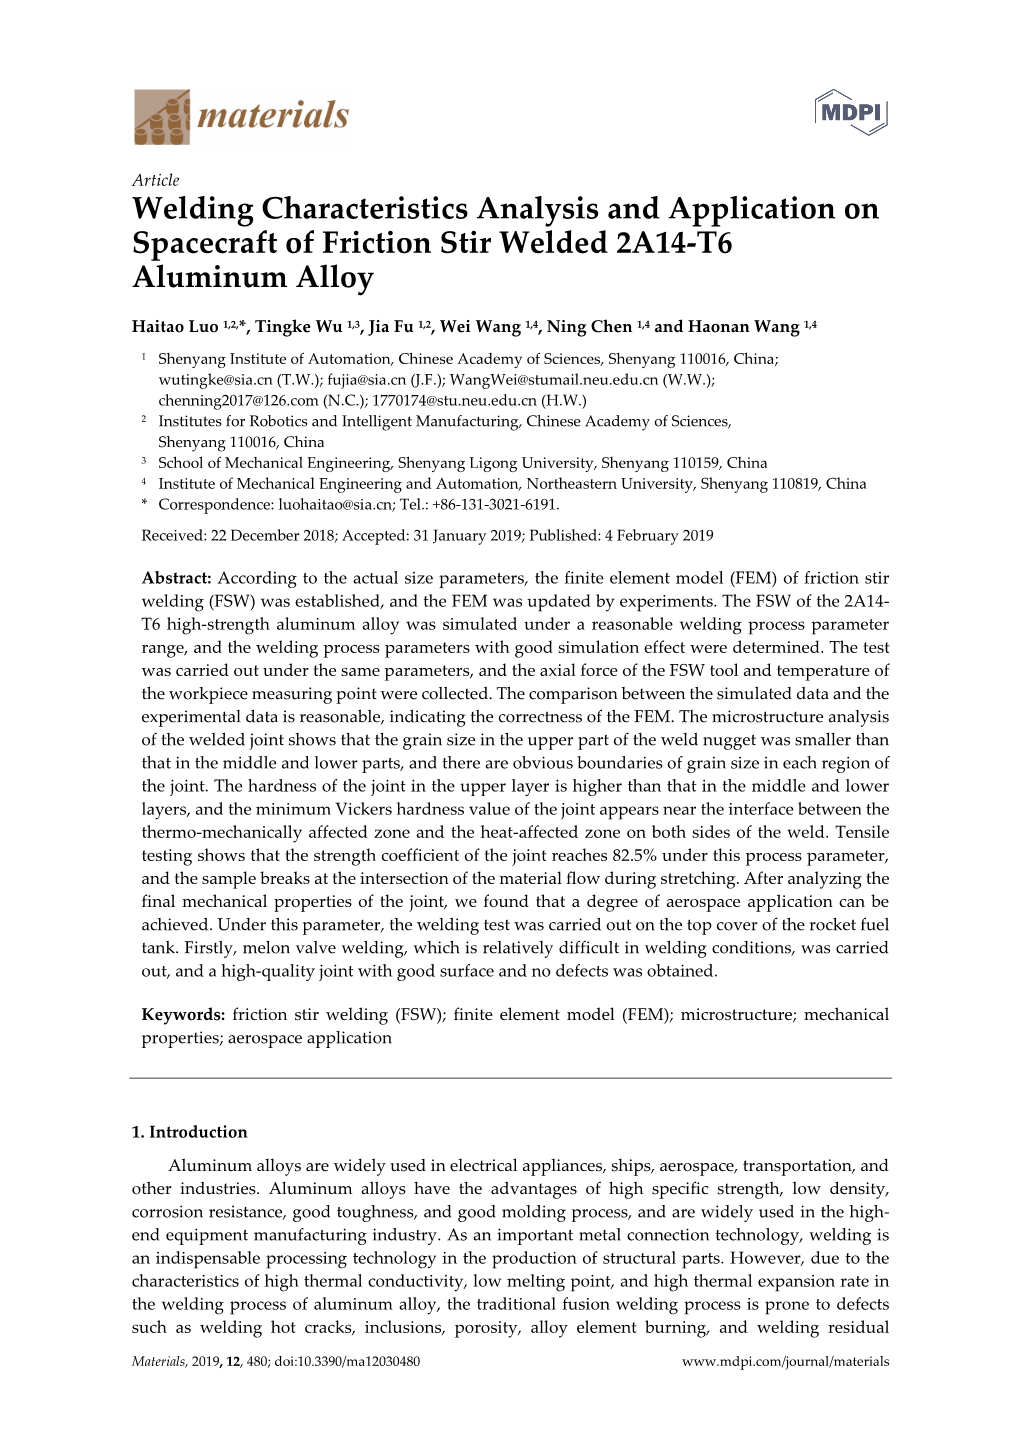 Welding Characteristics Analysis and Application on Spacecraft of Friction Stir Welded 2A14-T6 Aluminum Alloy